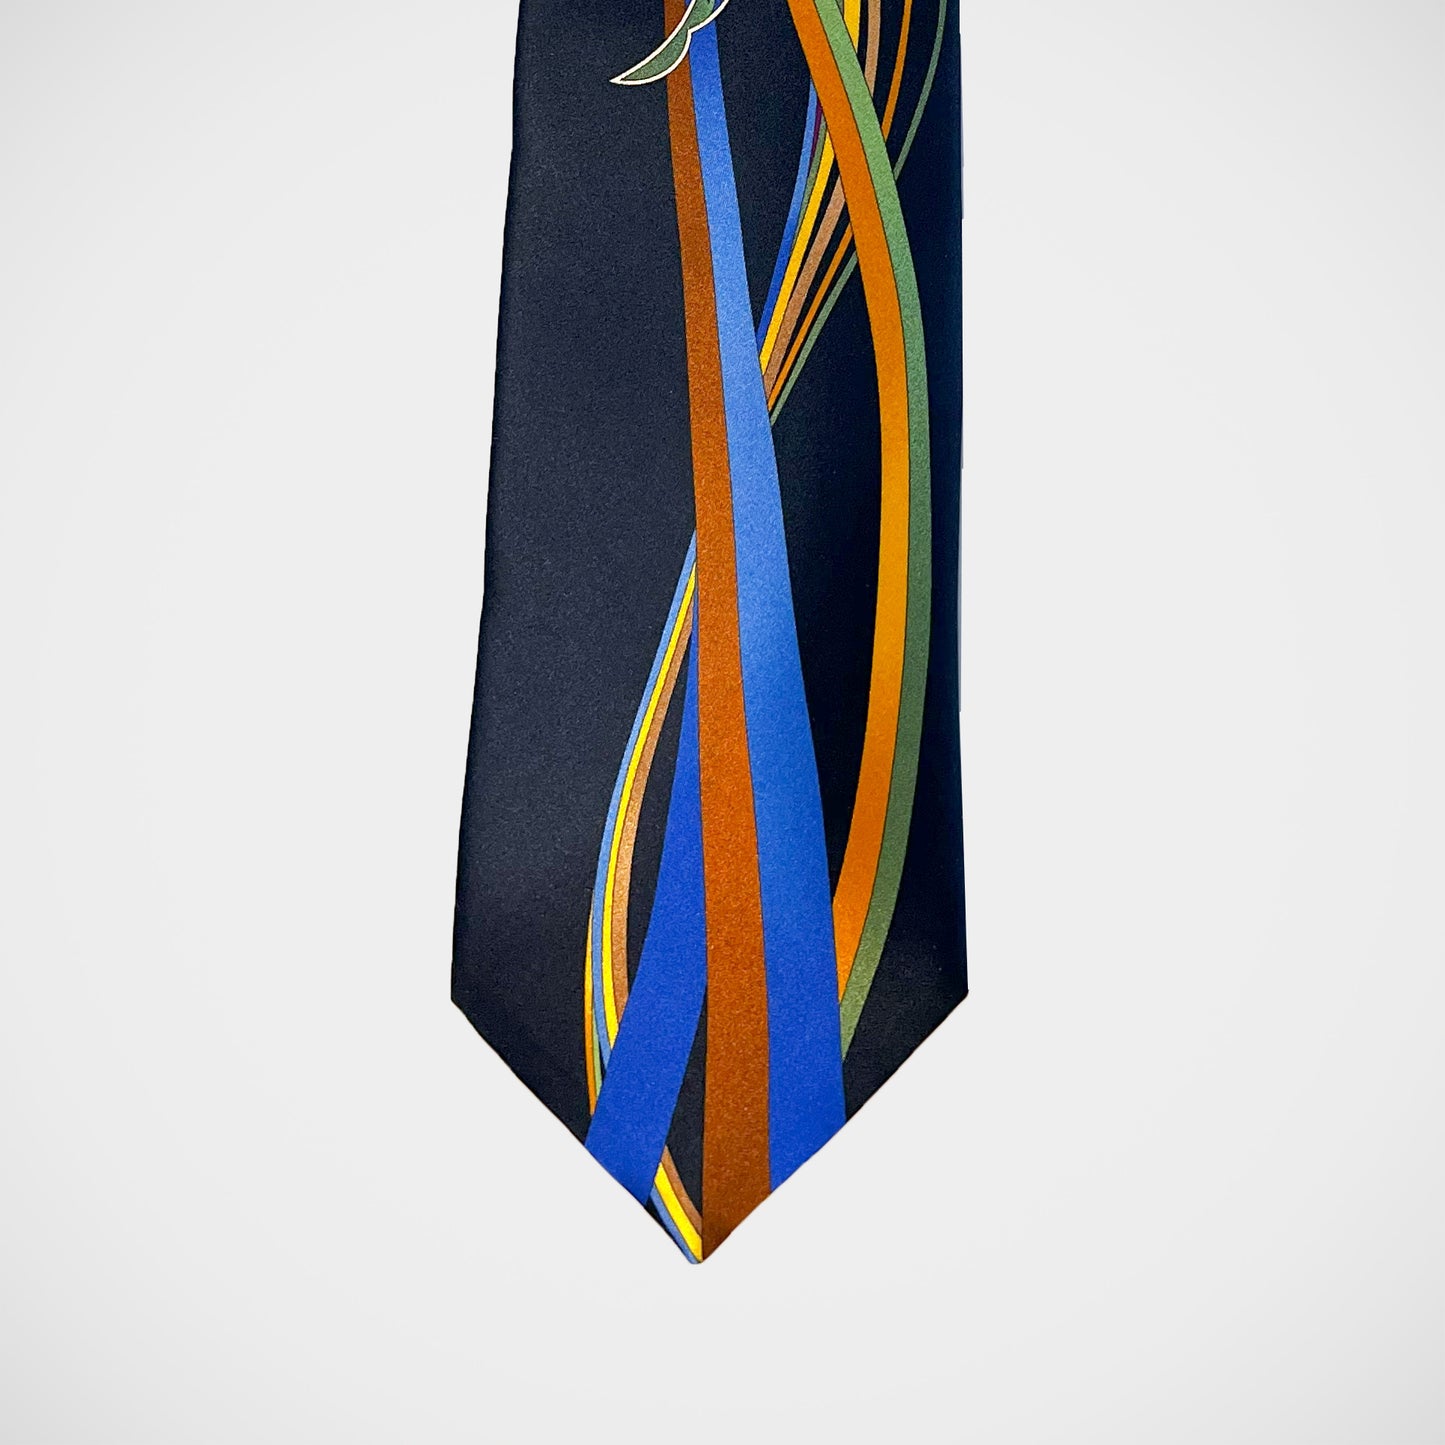 'Paisley and Ribbons on Navy' Tie